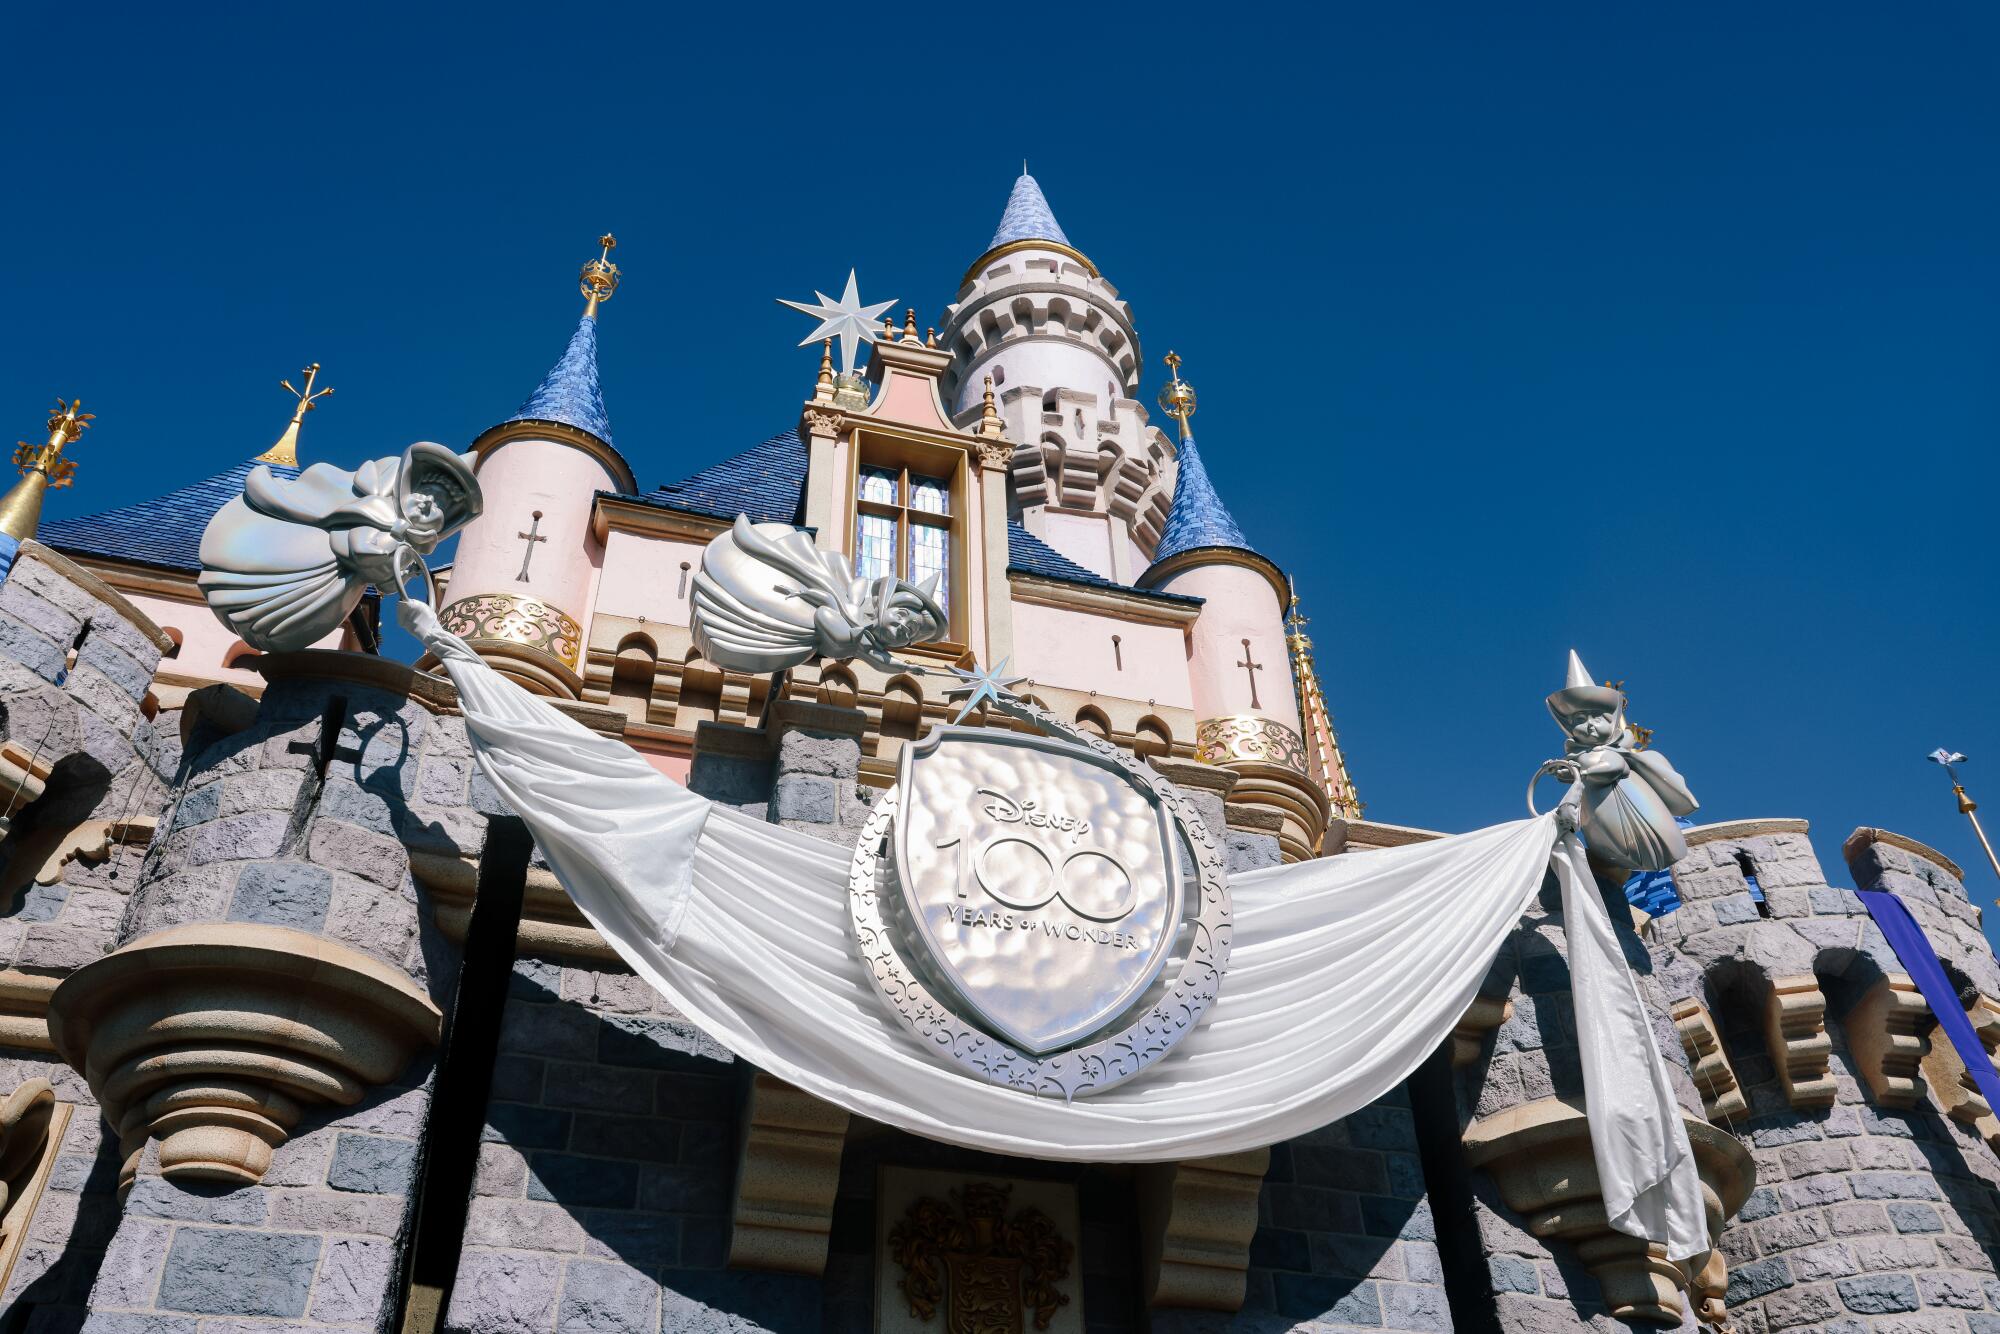 Disney's Sleeping Beauty's Castle decorated with 100th anniversary banners.